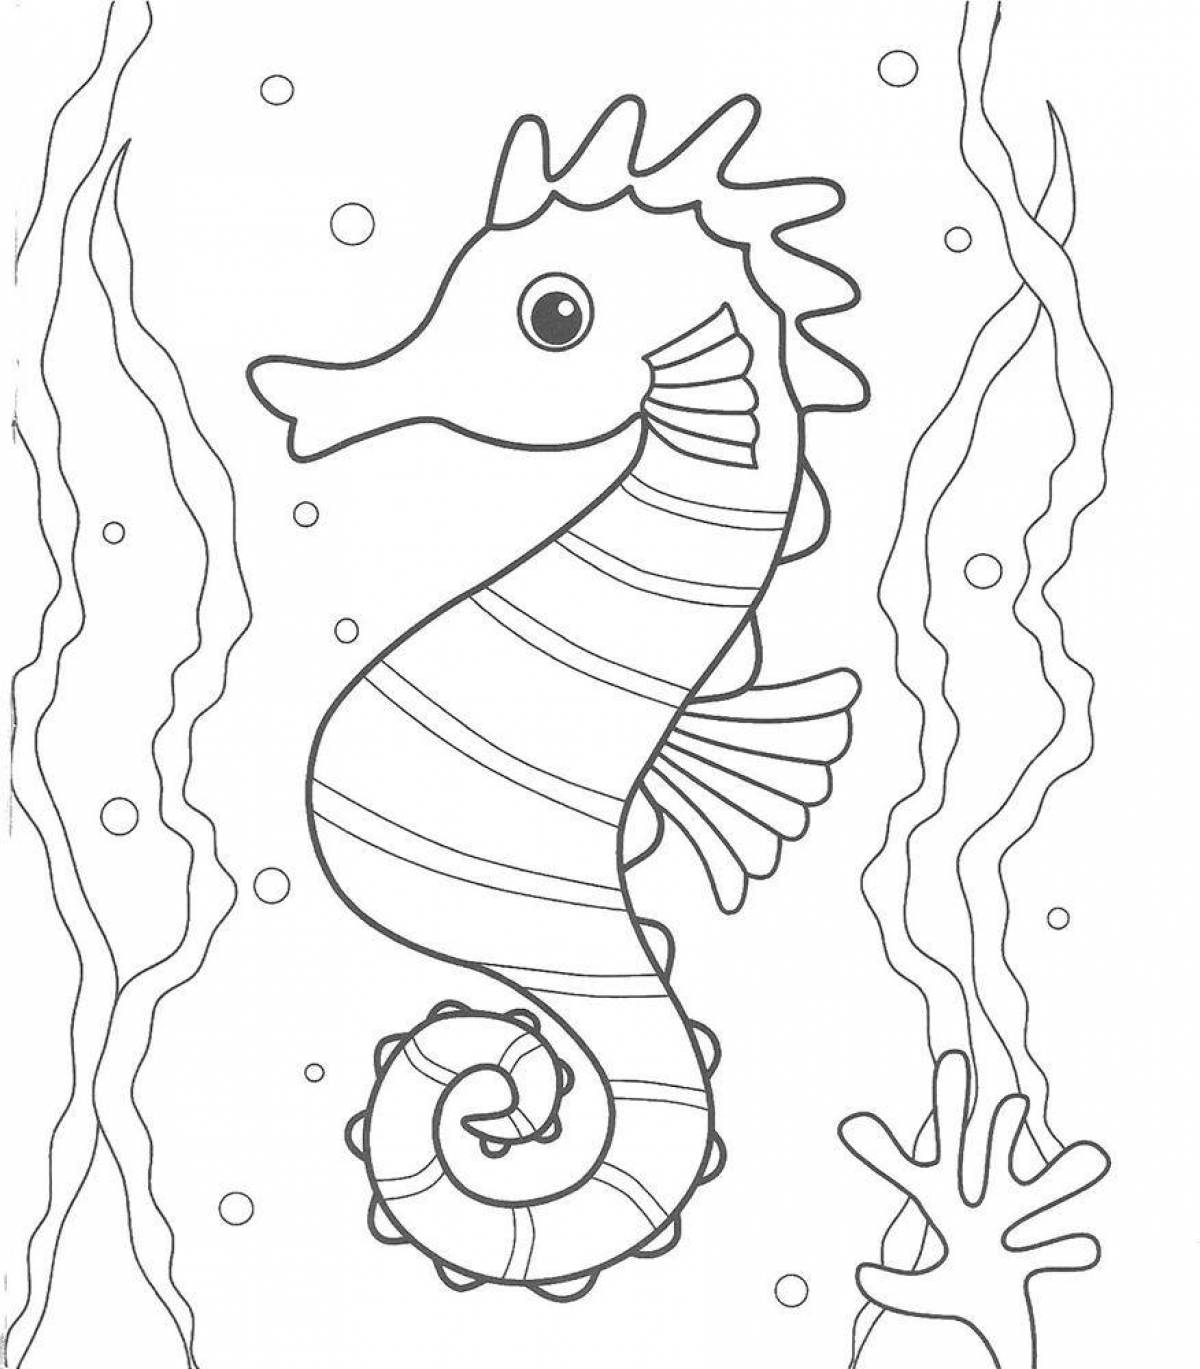 Great marine life coloring book for 3-4 year olds